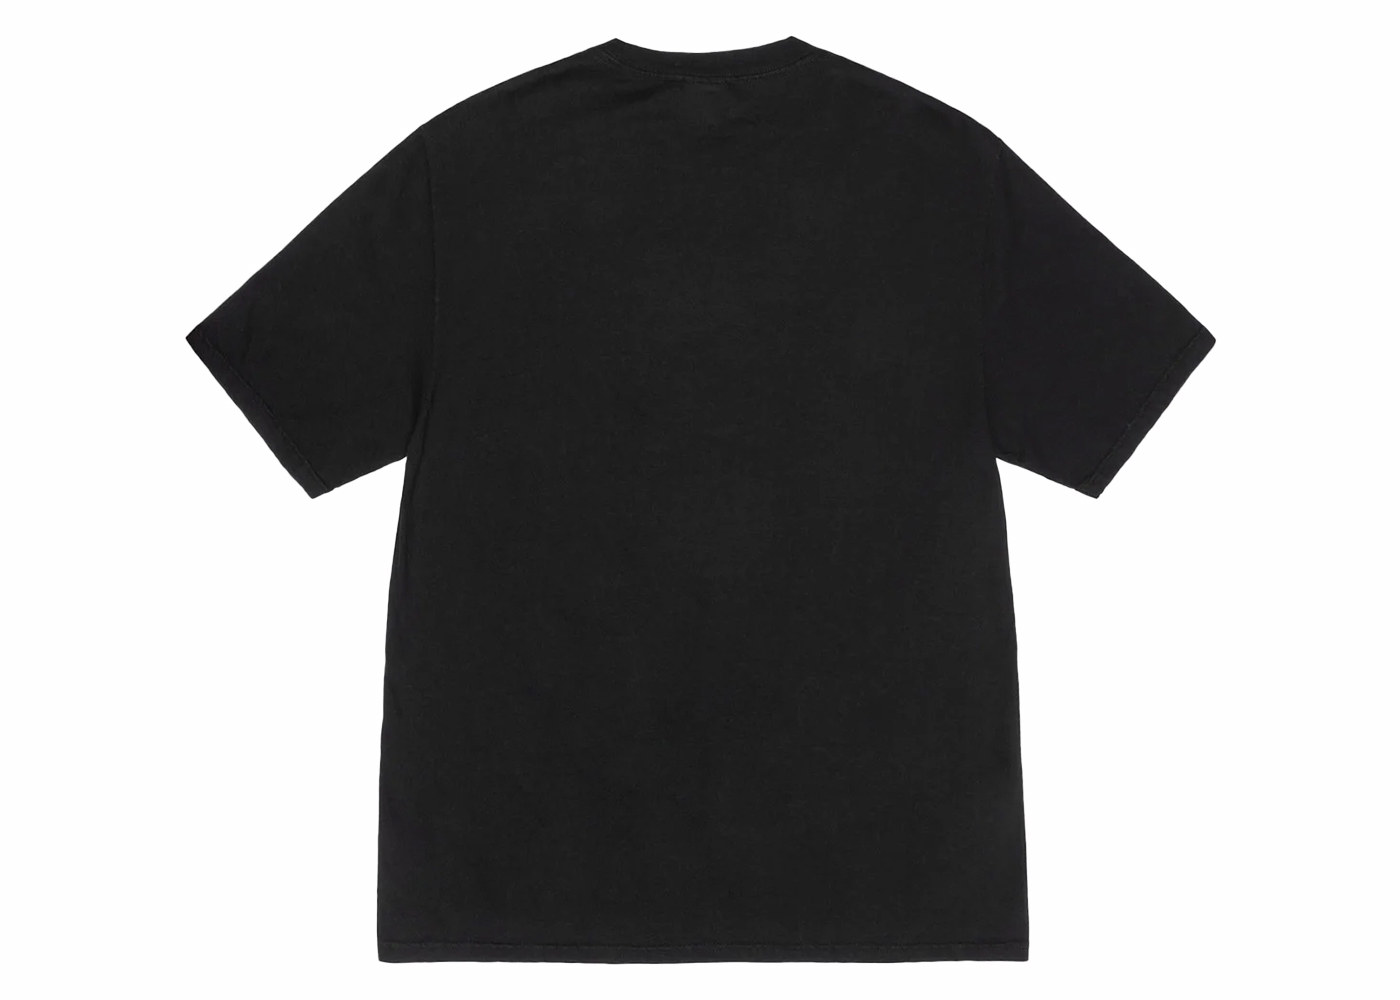 Stussy x Our Legacy Ol Sport Pigment Dyed Tee Black